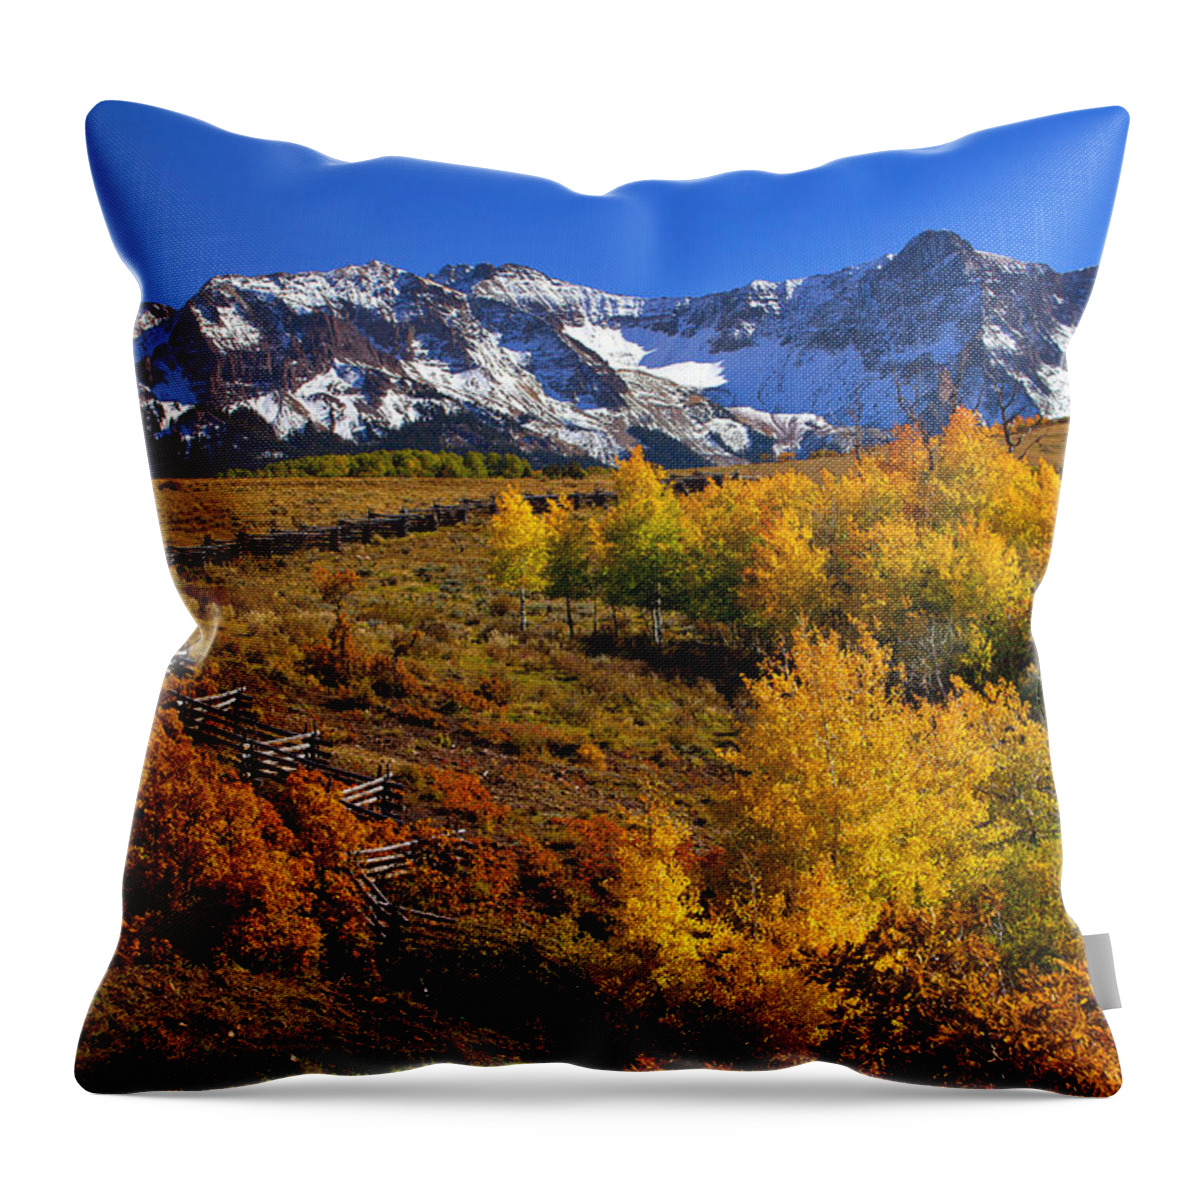 Mountains Throw Pillow featuring the photograph Colorado Country by Darren White